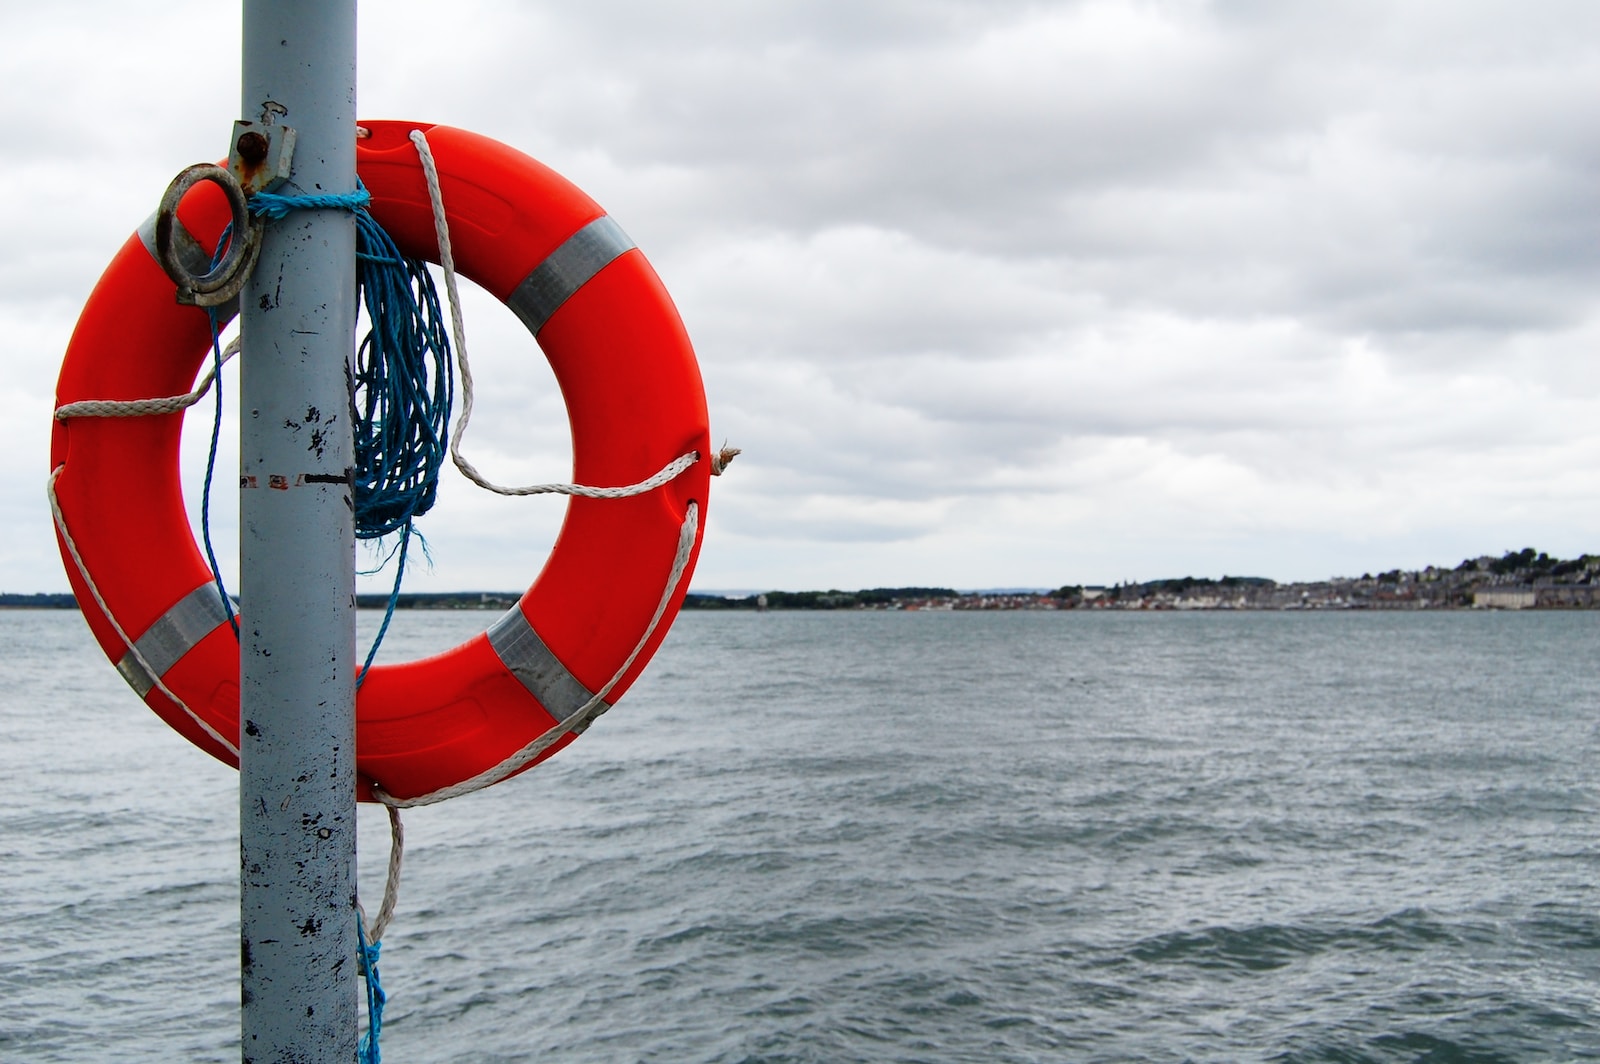 a life preserver on a boat in the water